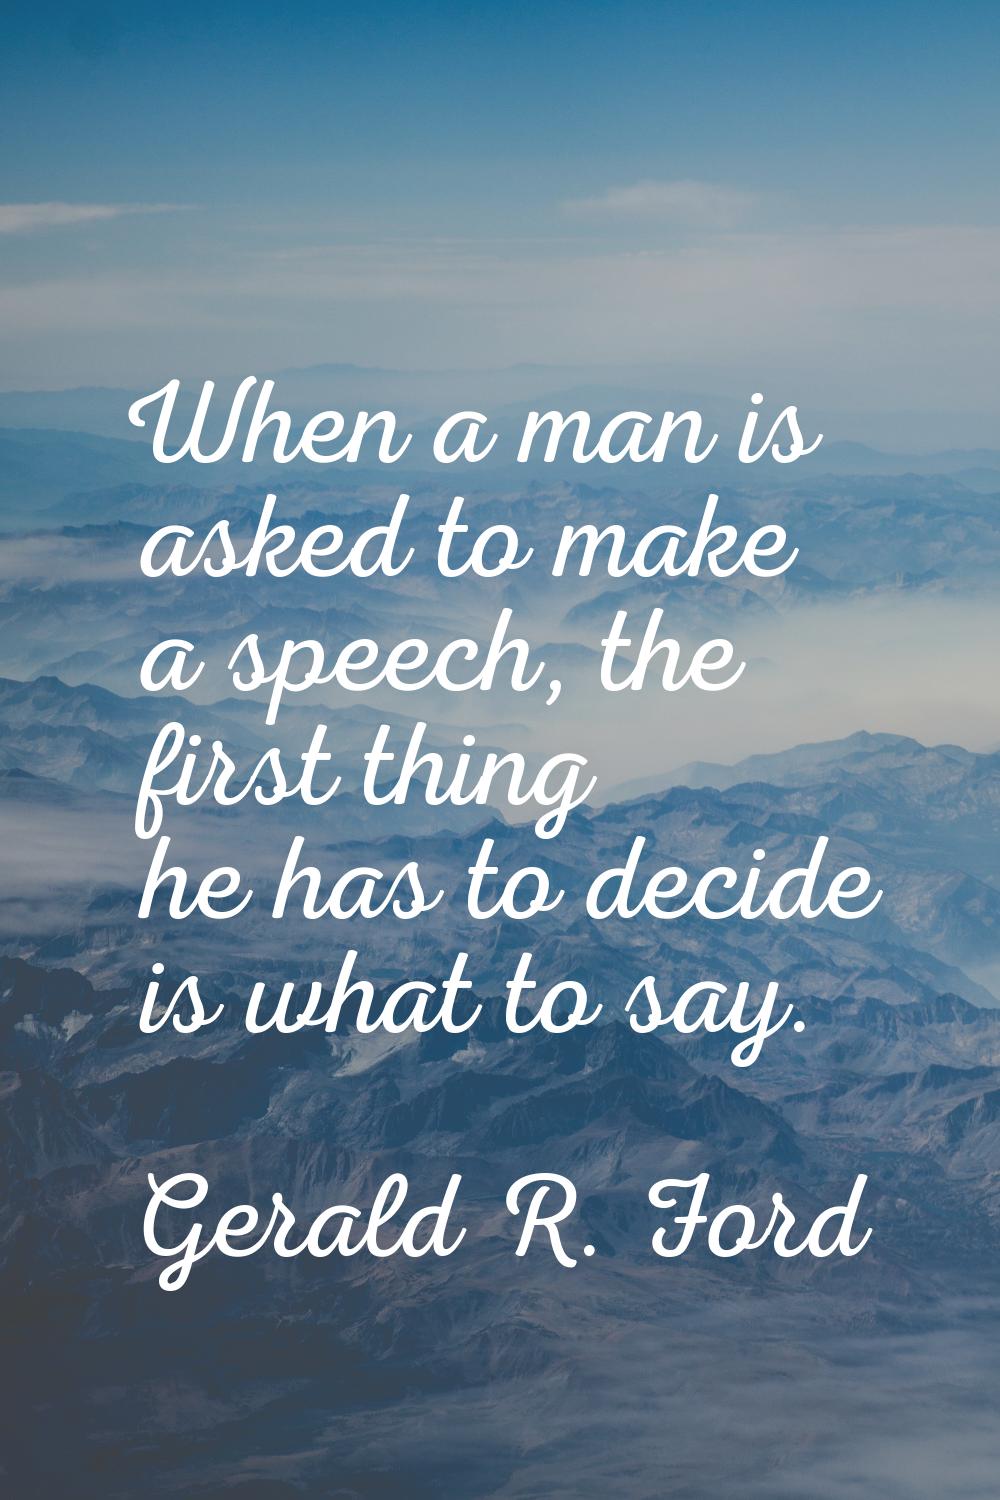 When a man is asked to make a speech, the first thing he has to decide is what to say.